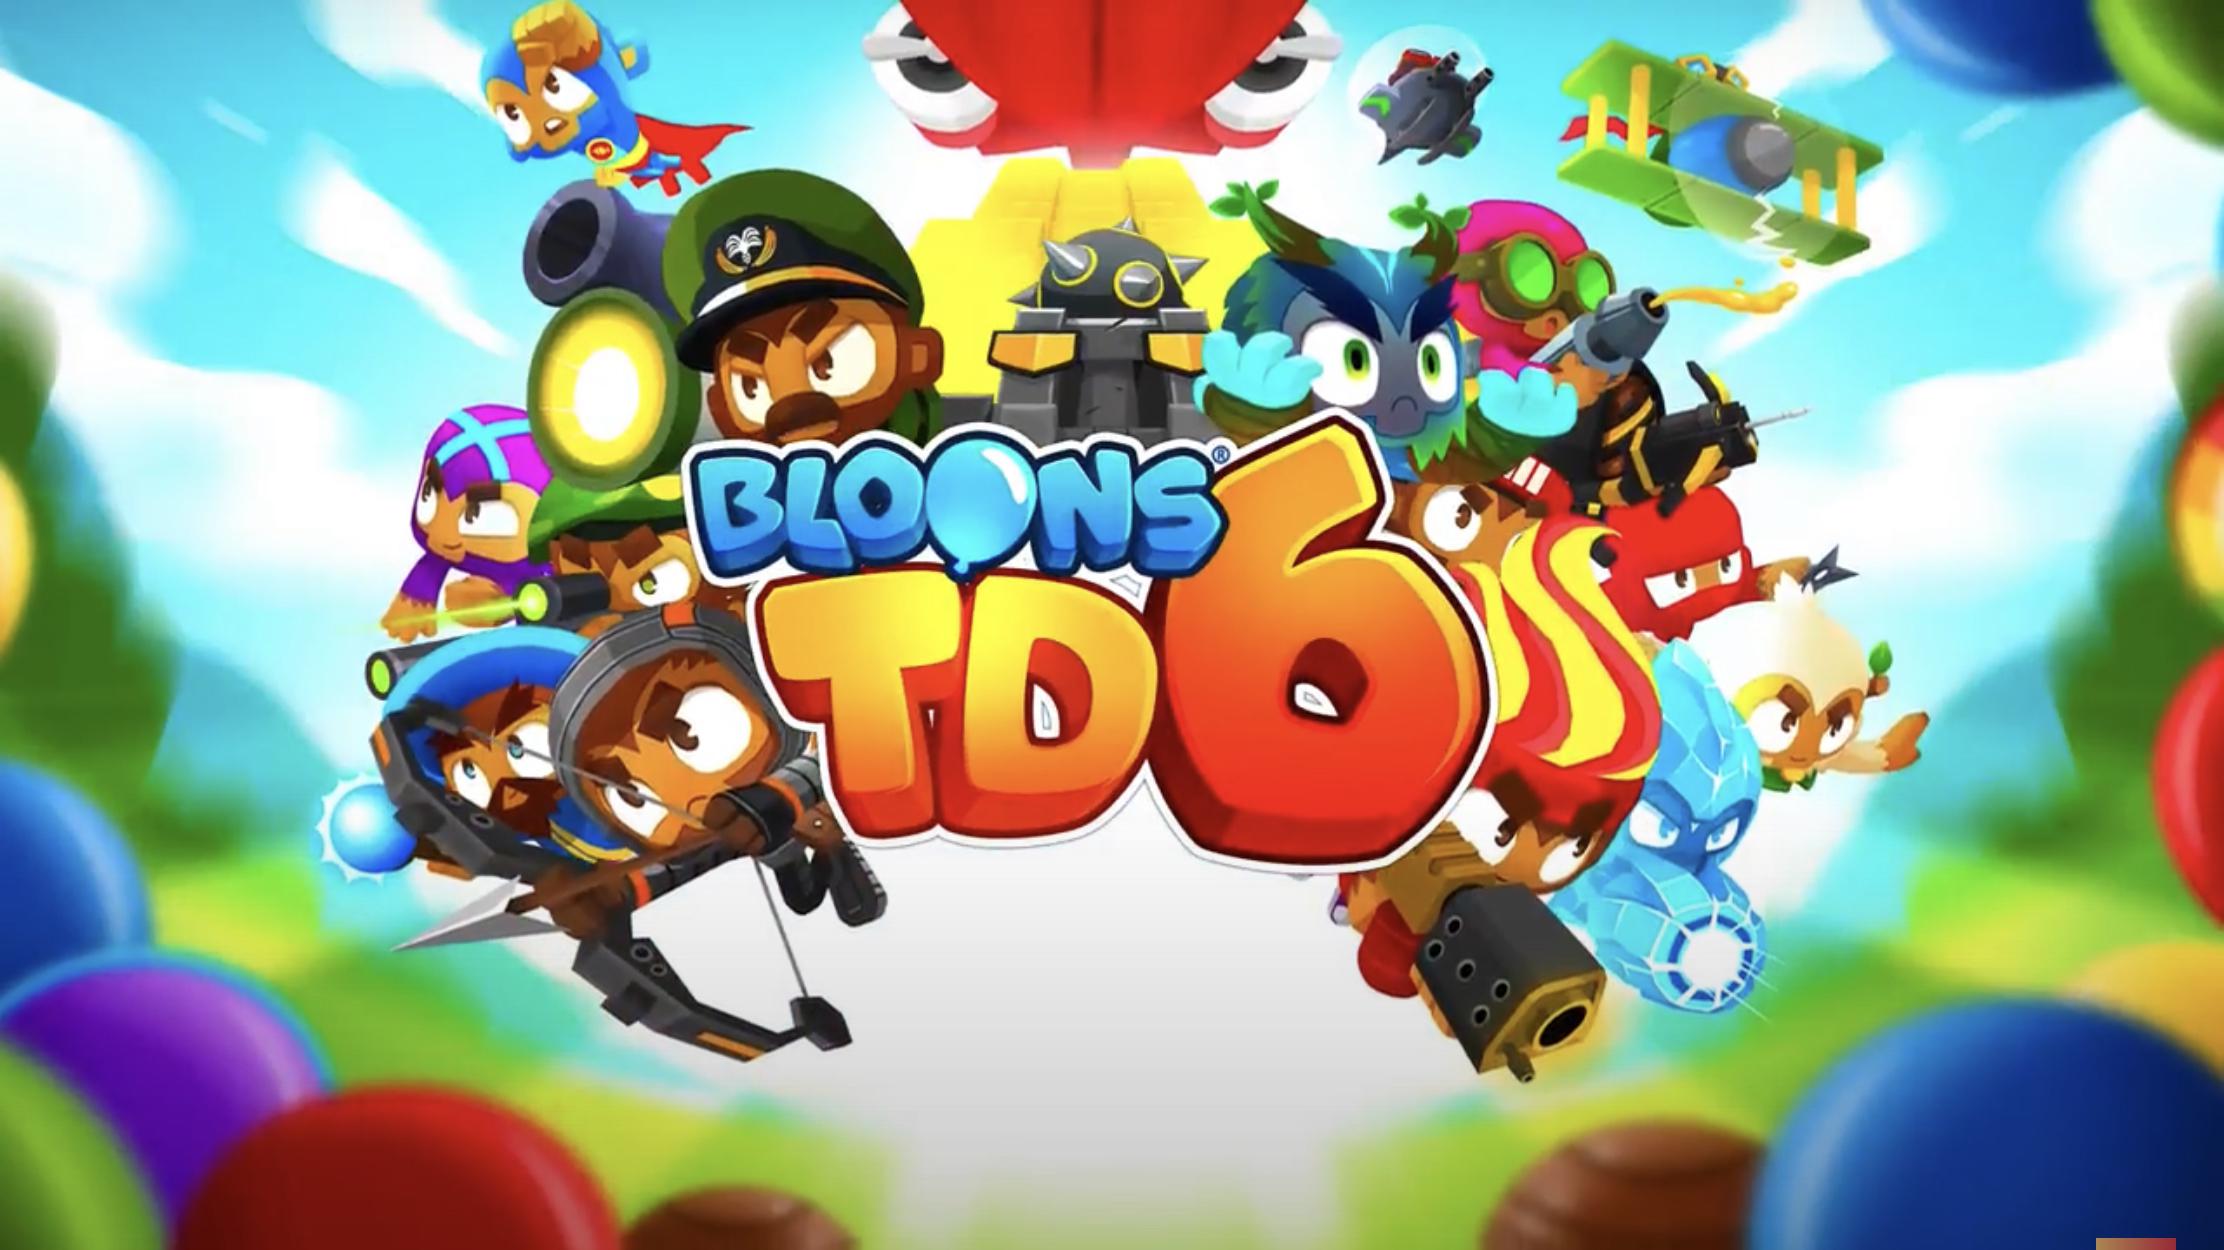 Video Game Bloons TD 6 HD Wallpaper by That kiDD